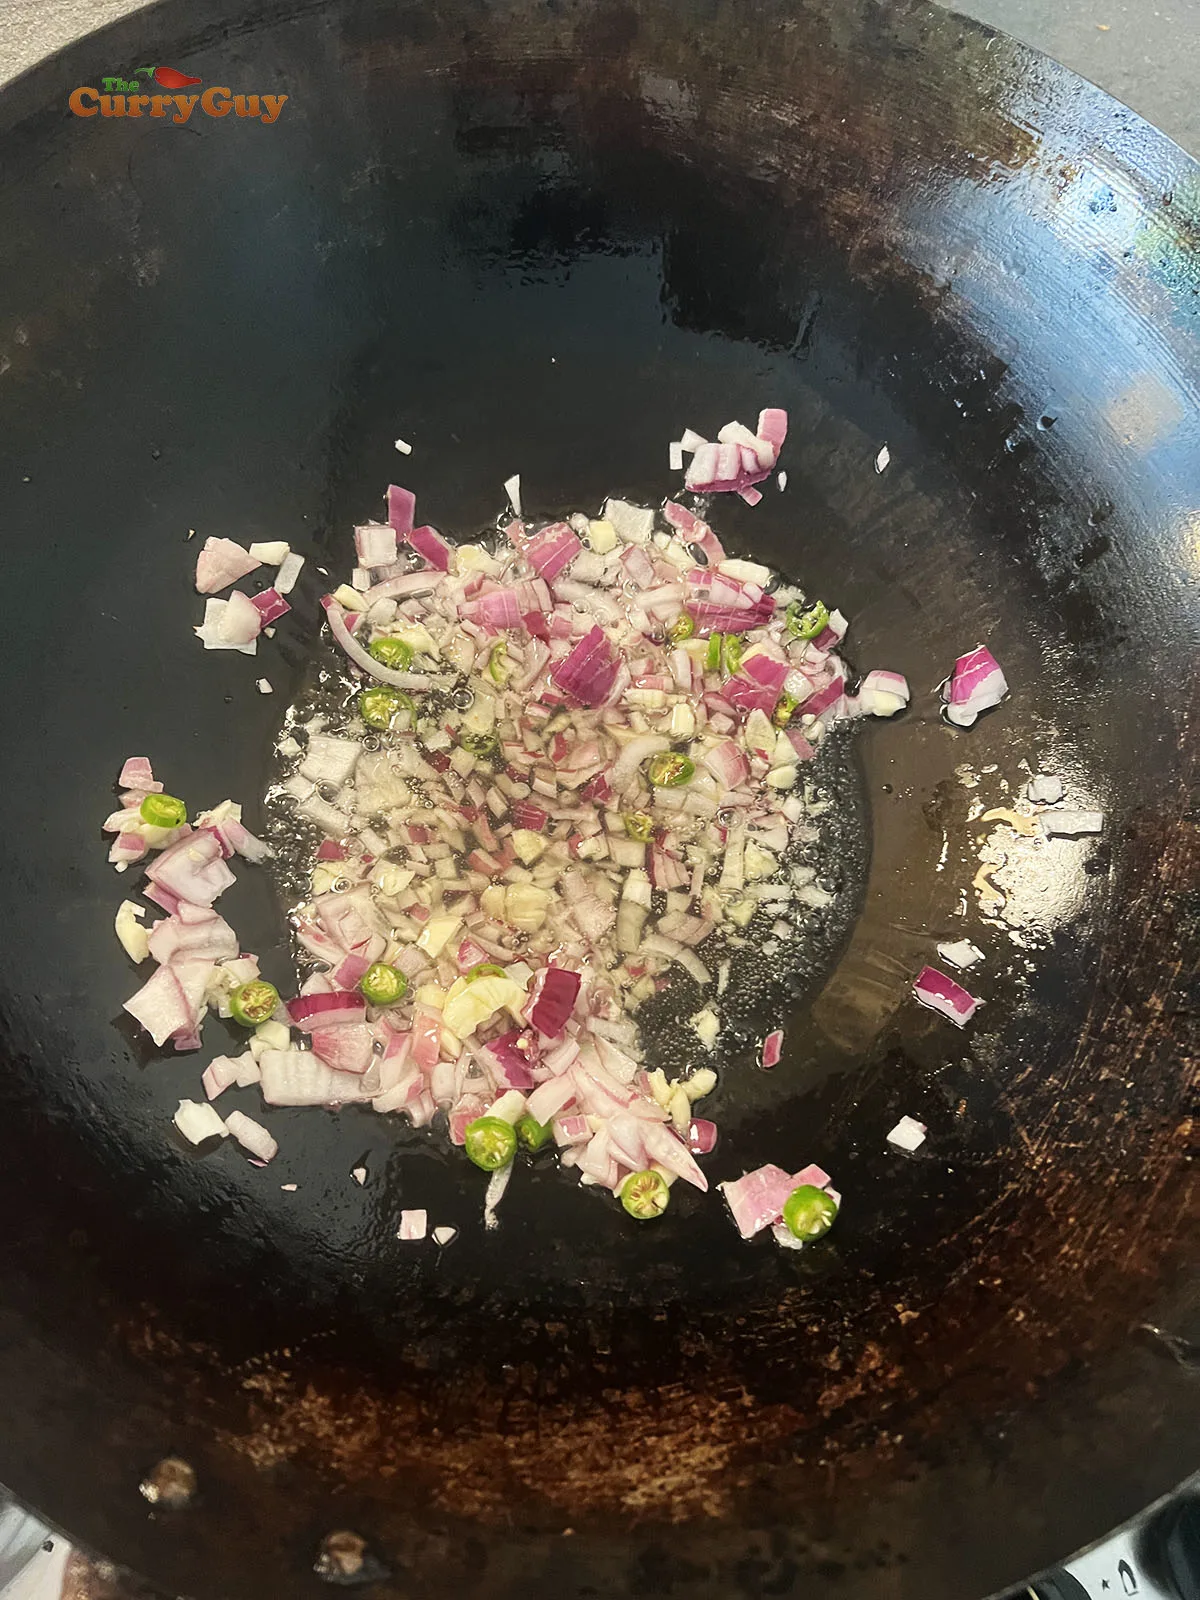 Adding aromatic ingredients to the wok